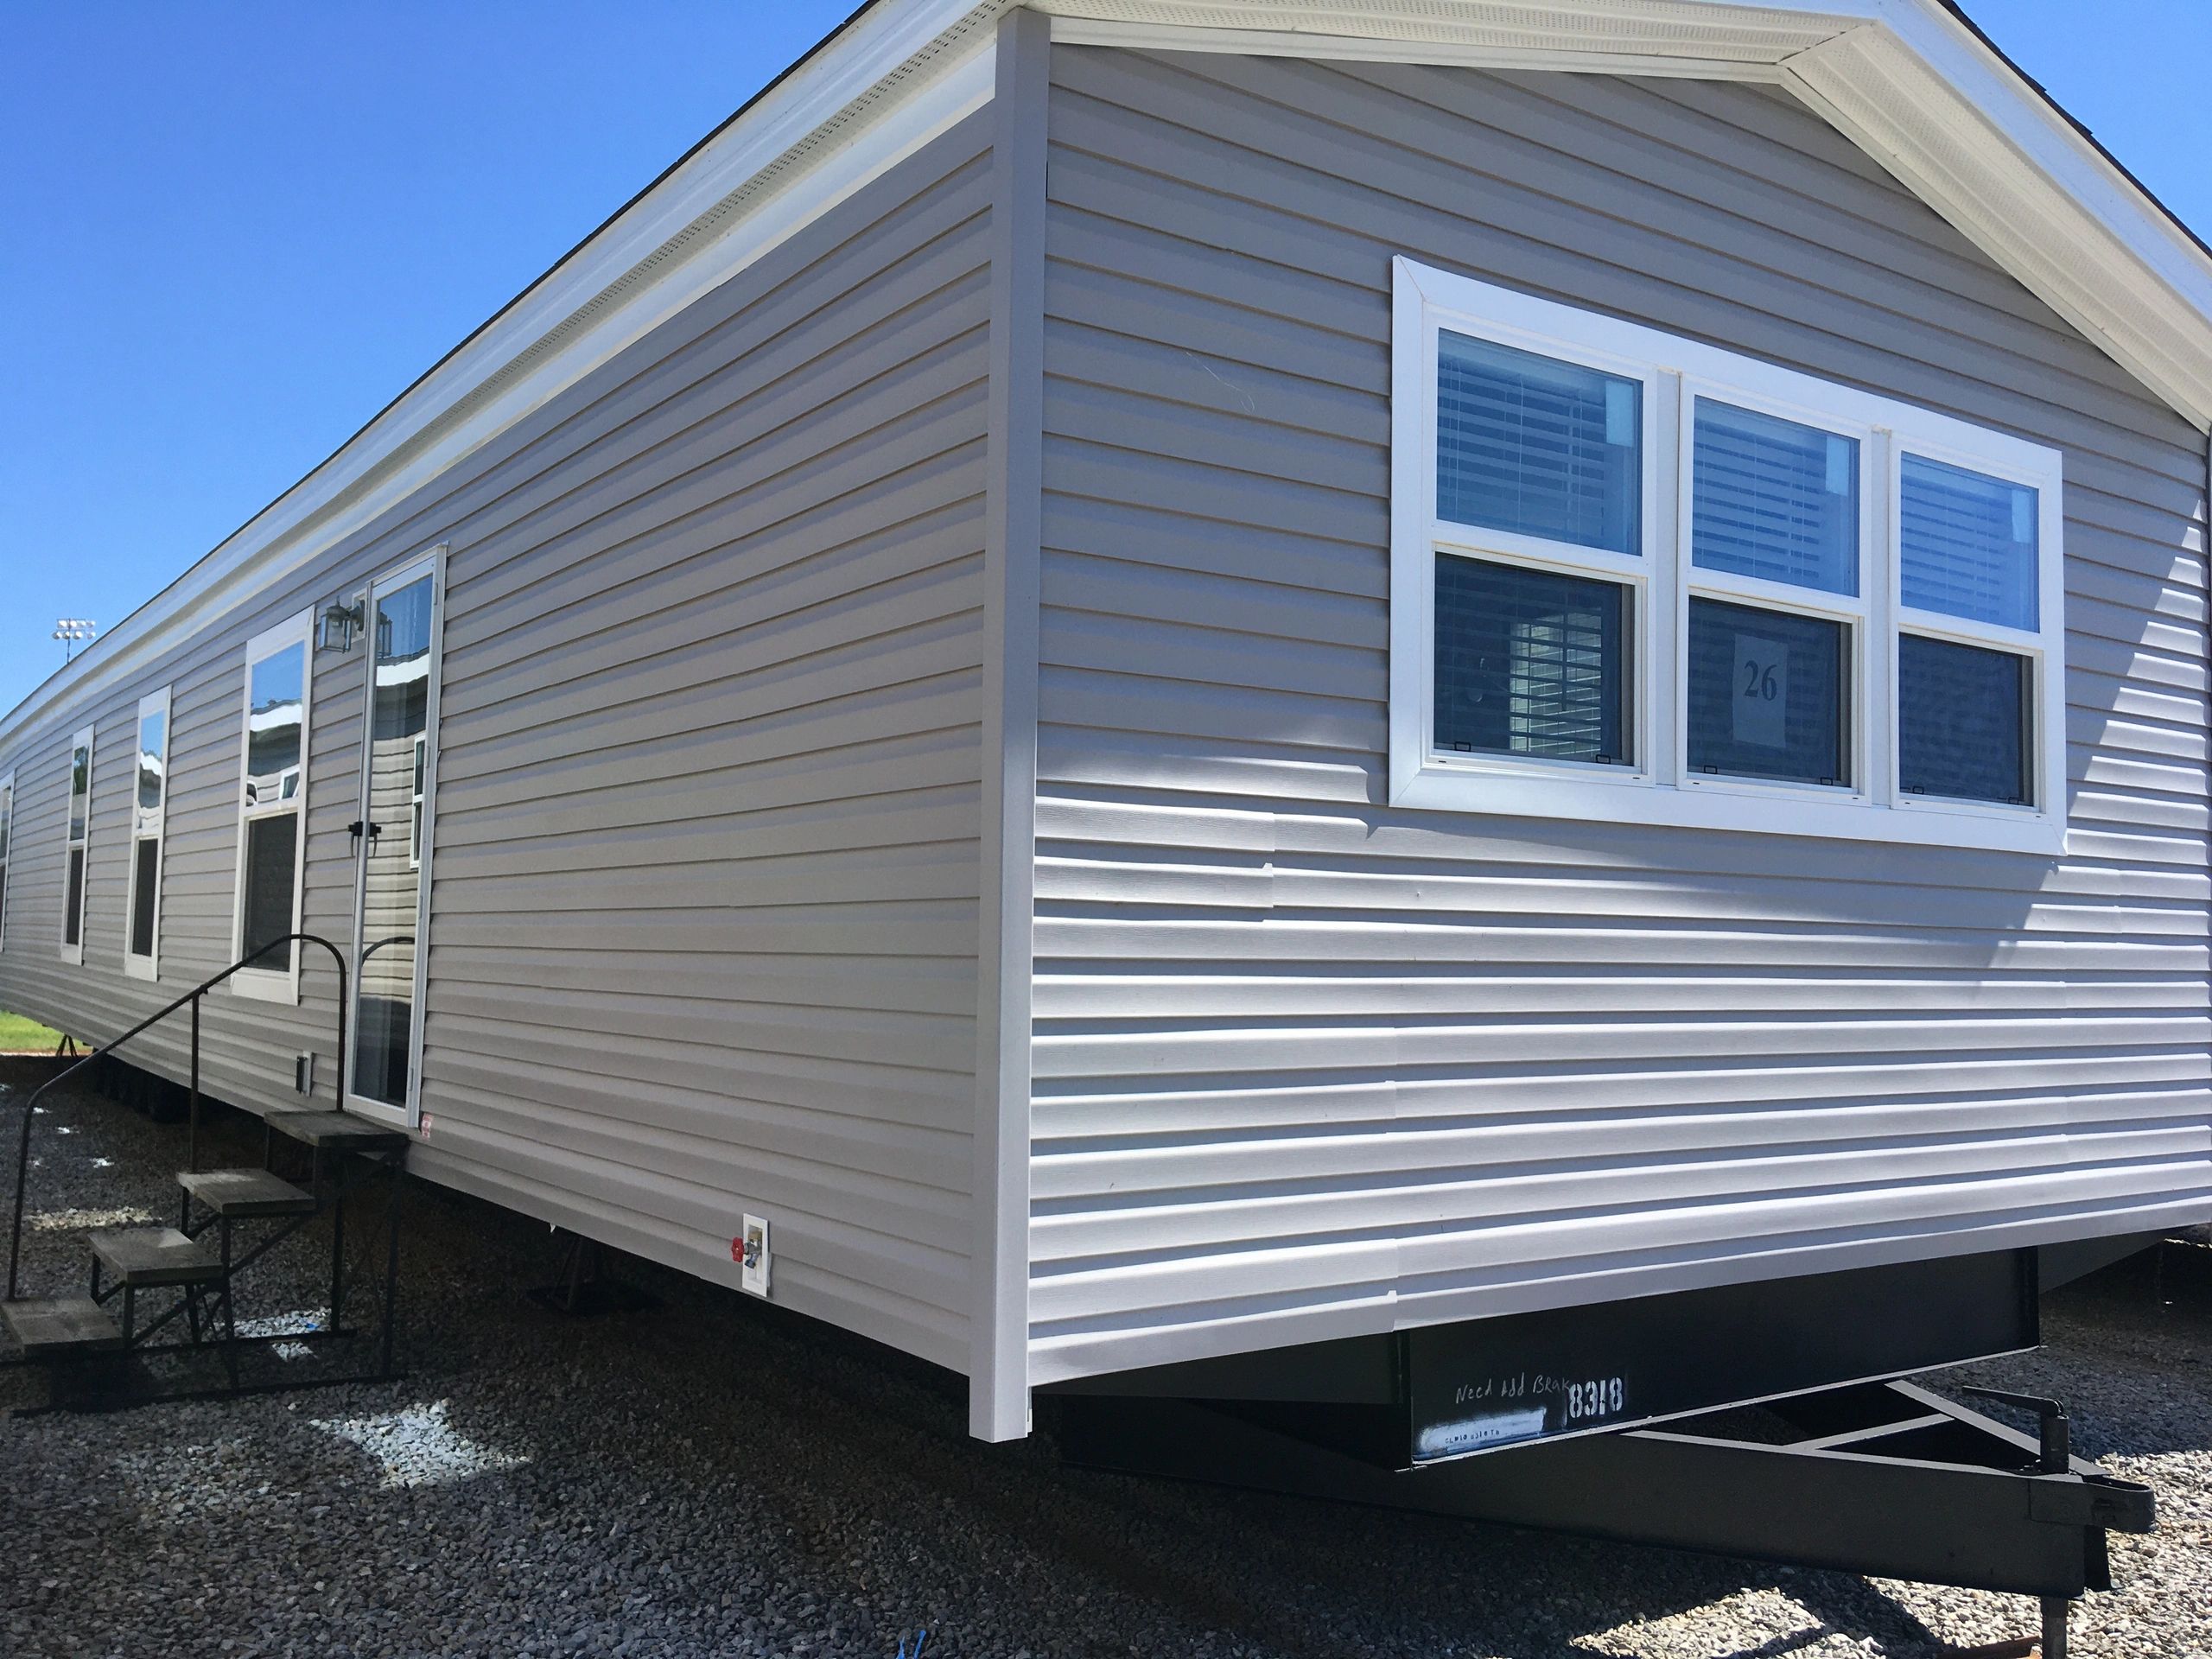 New manufactured home for sale.